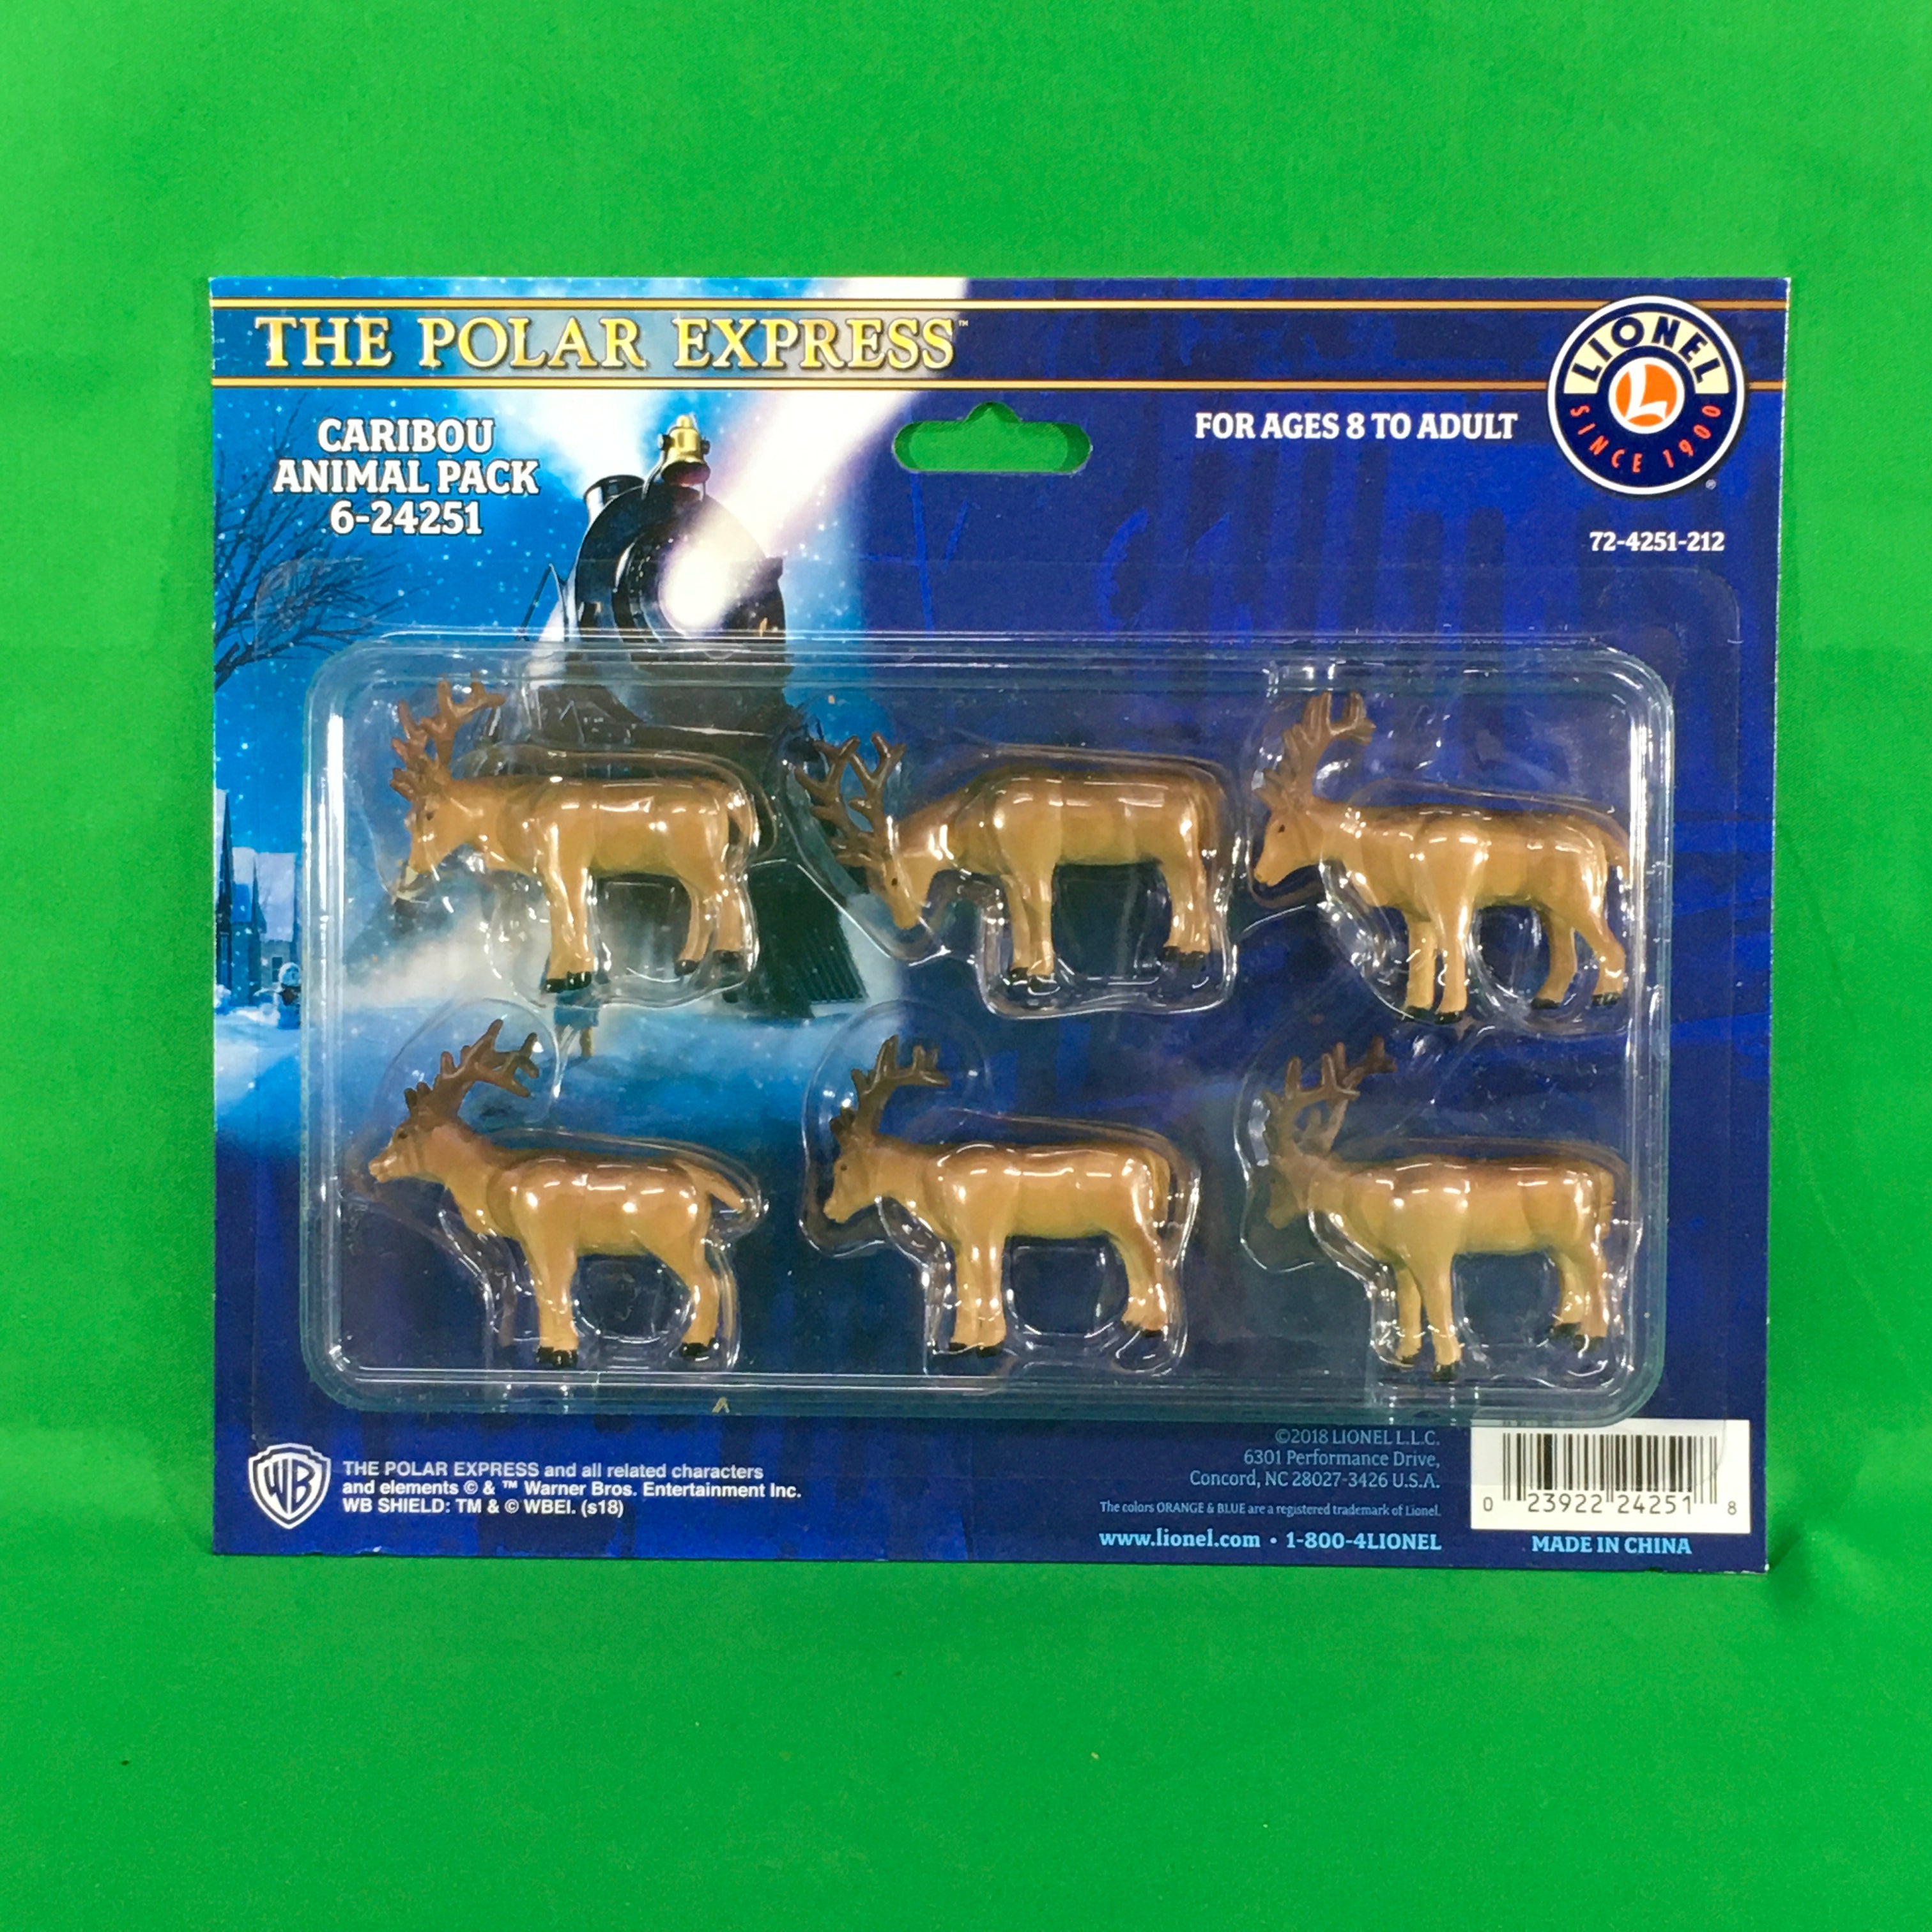 Lionel 6-24251 - The Polar Express Animal Pack "Caribou"